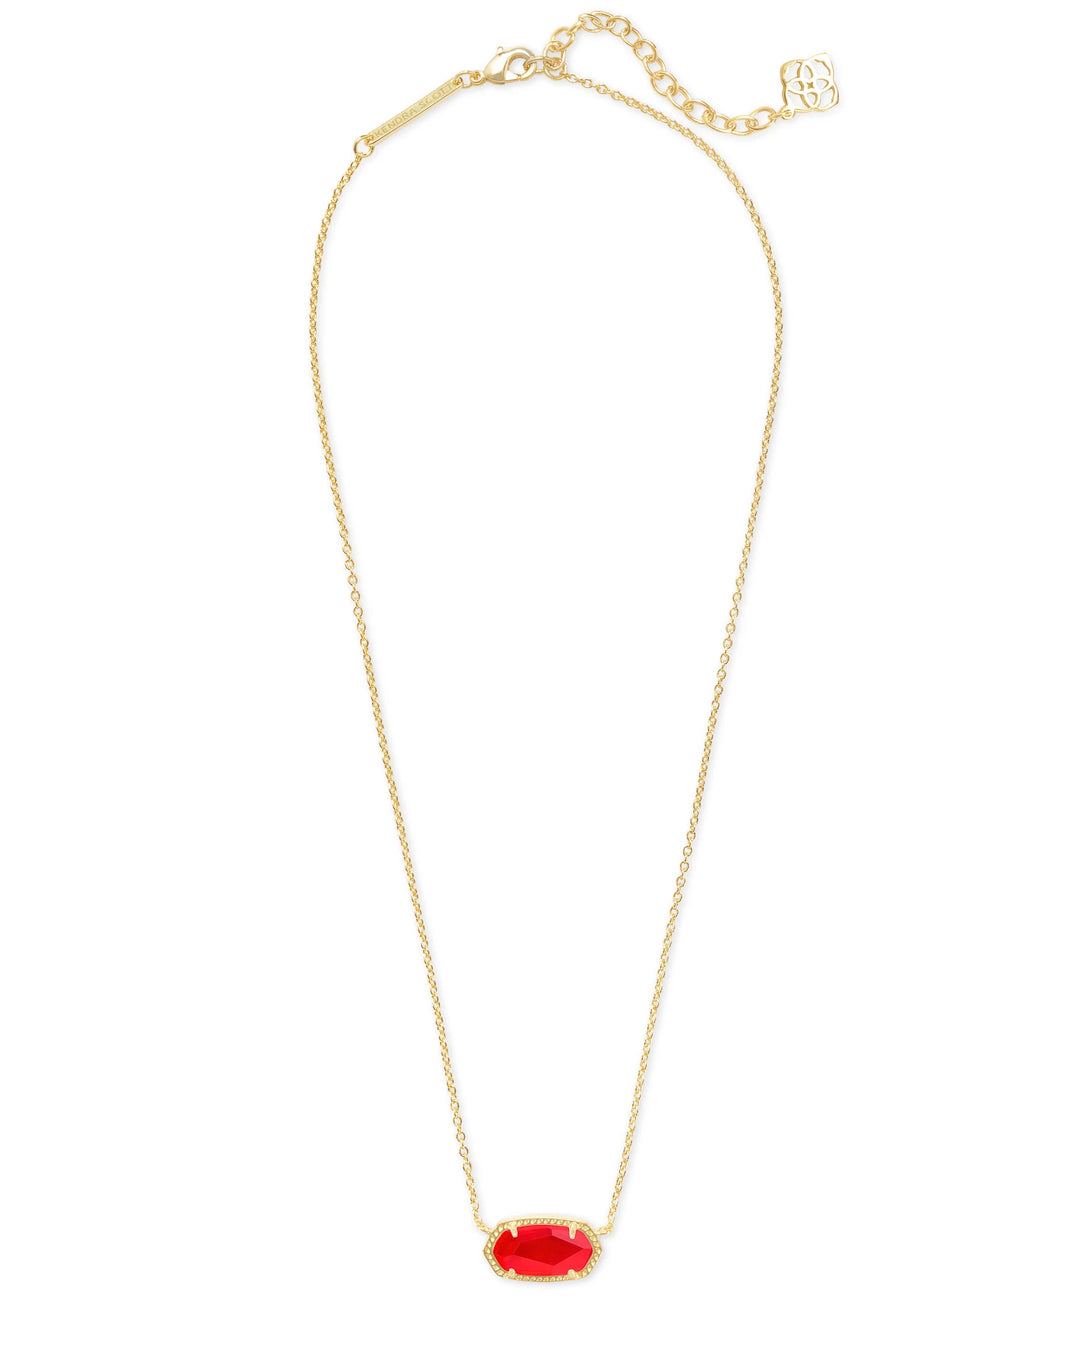 Kendra Scott Elisa Boxed Pendant Necklace in Gold Red Illusion